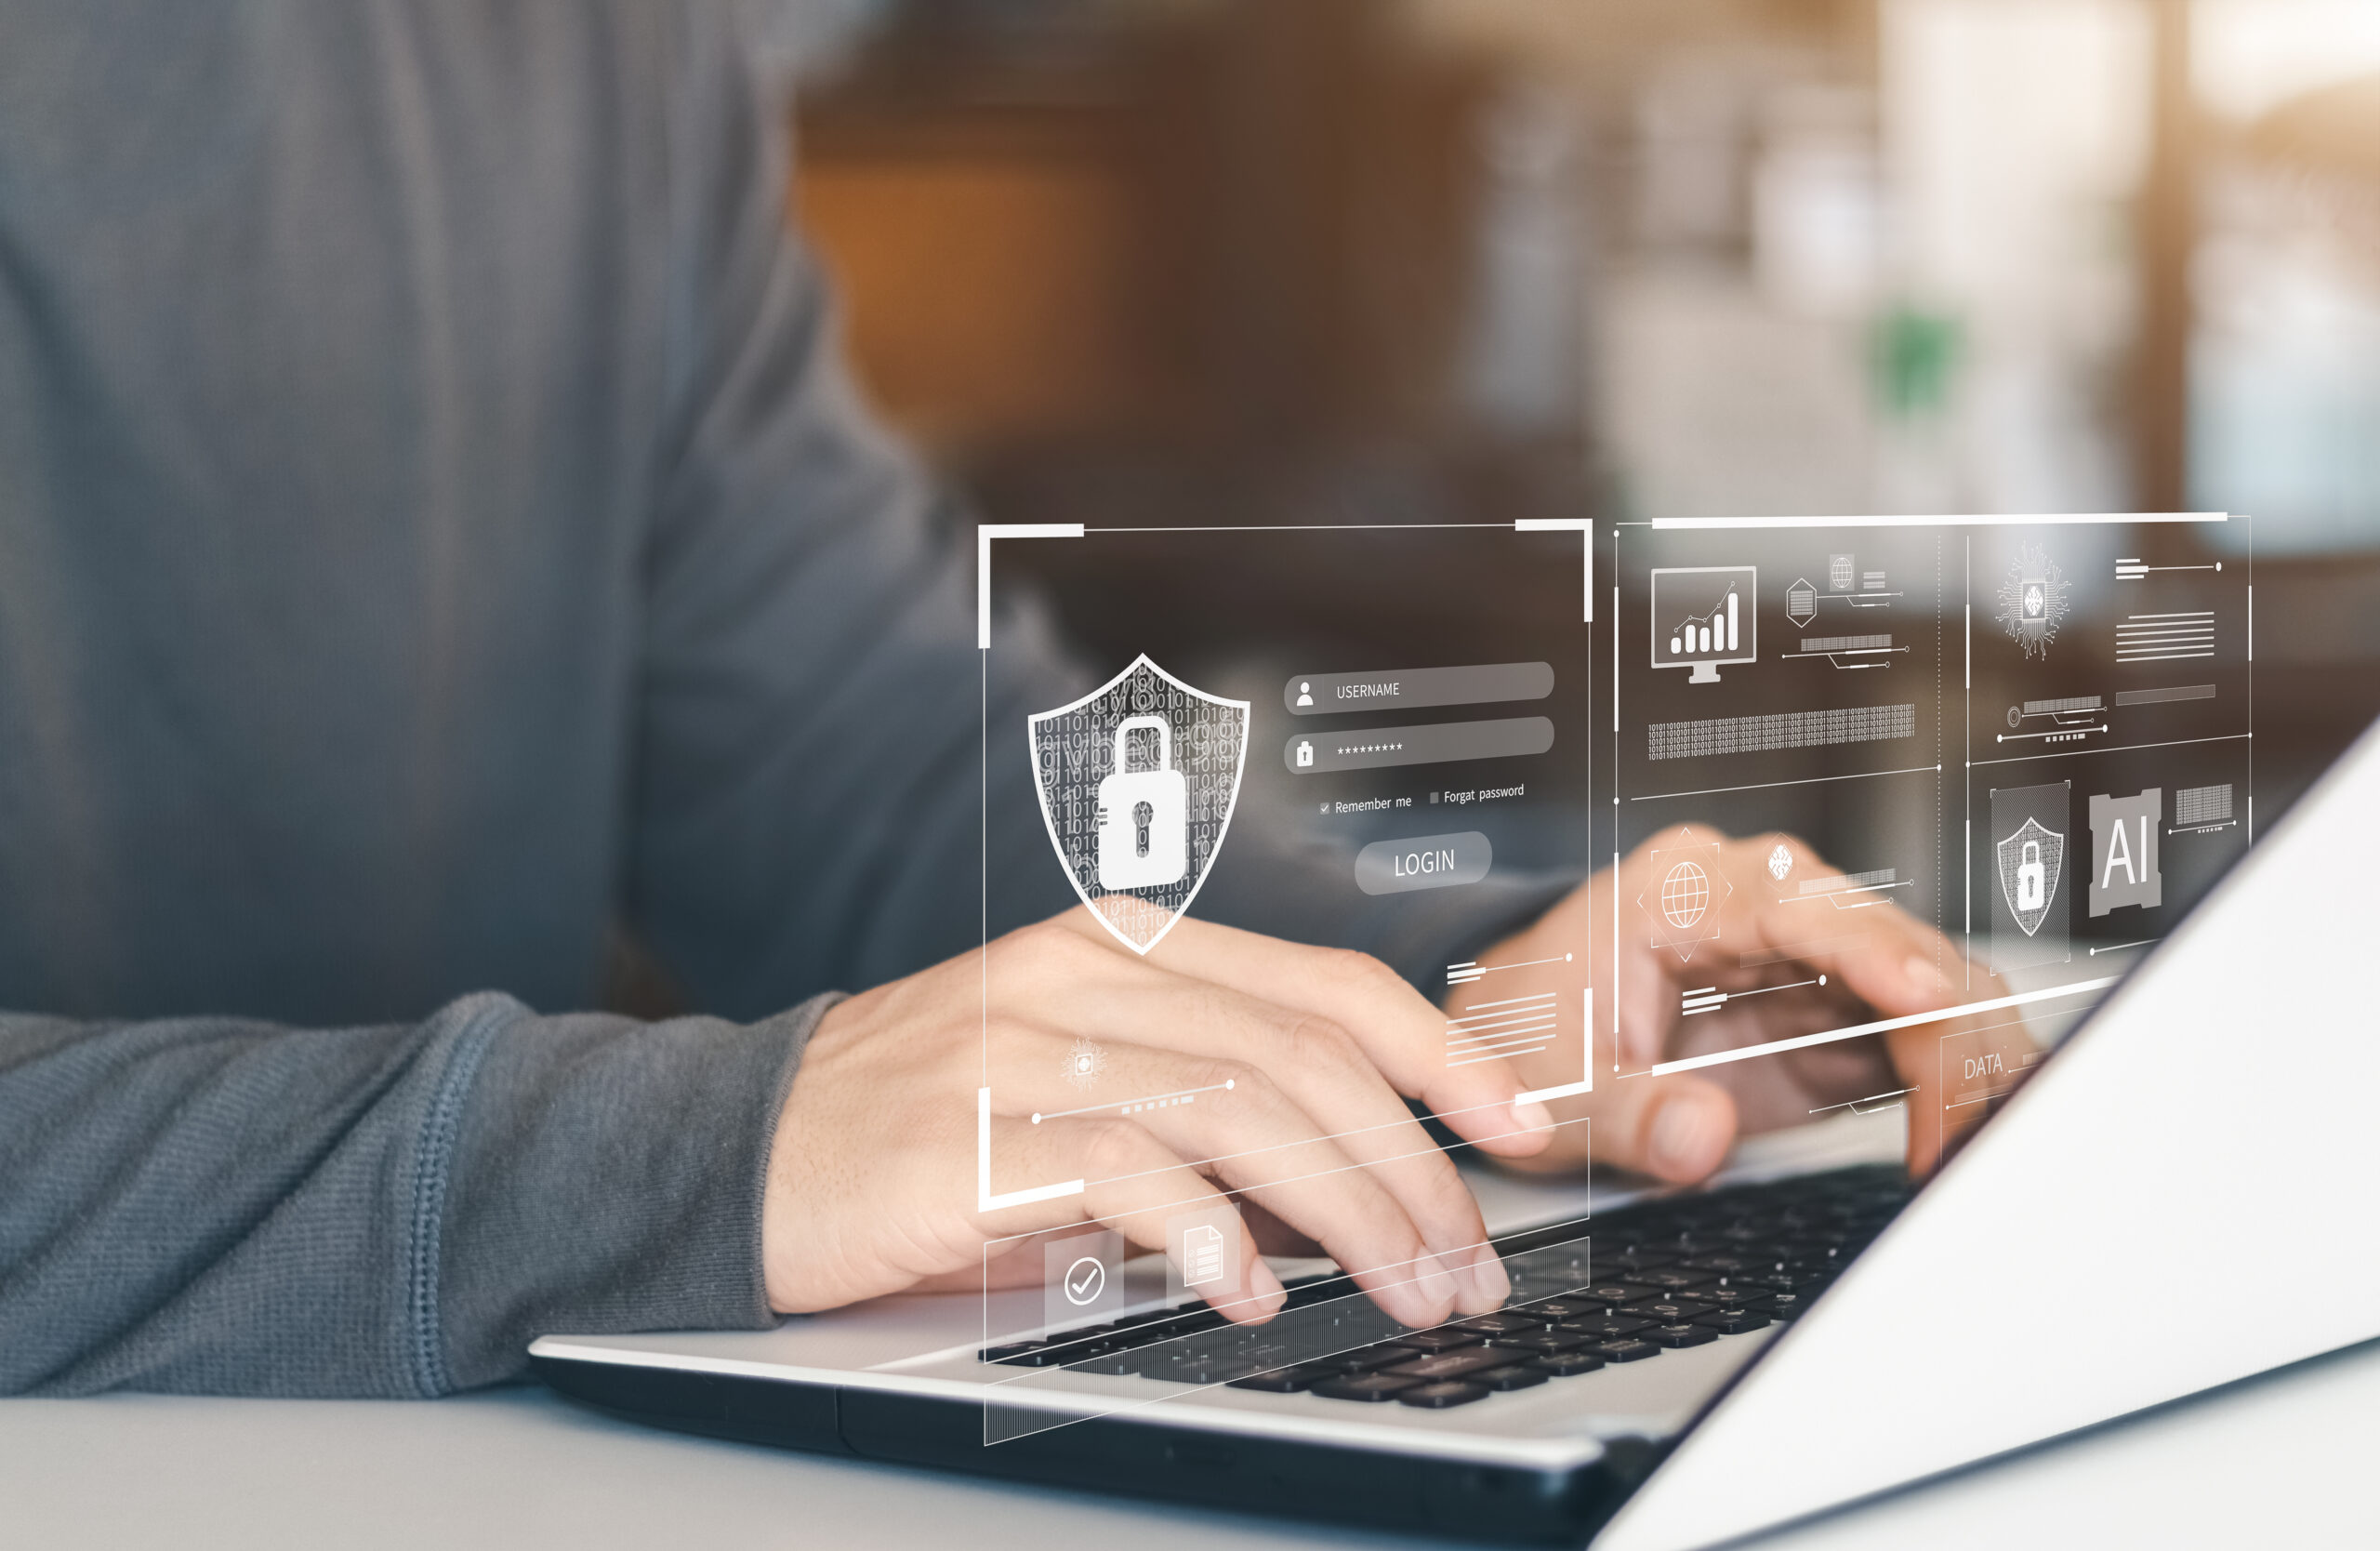 Cybersecurity for Small Businesses: How to Protect Your Business and What to Watch Out For